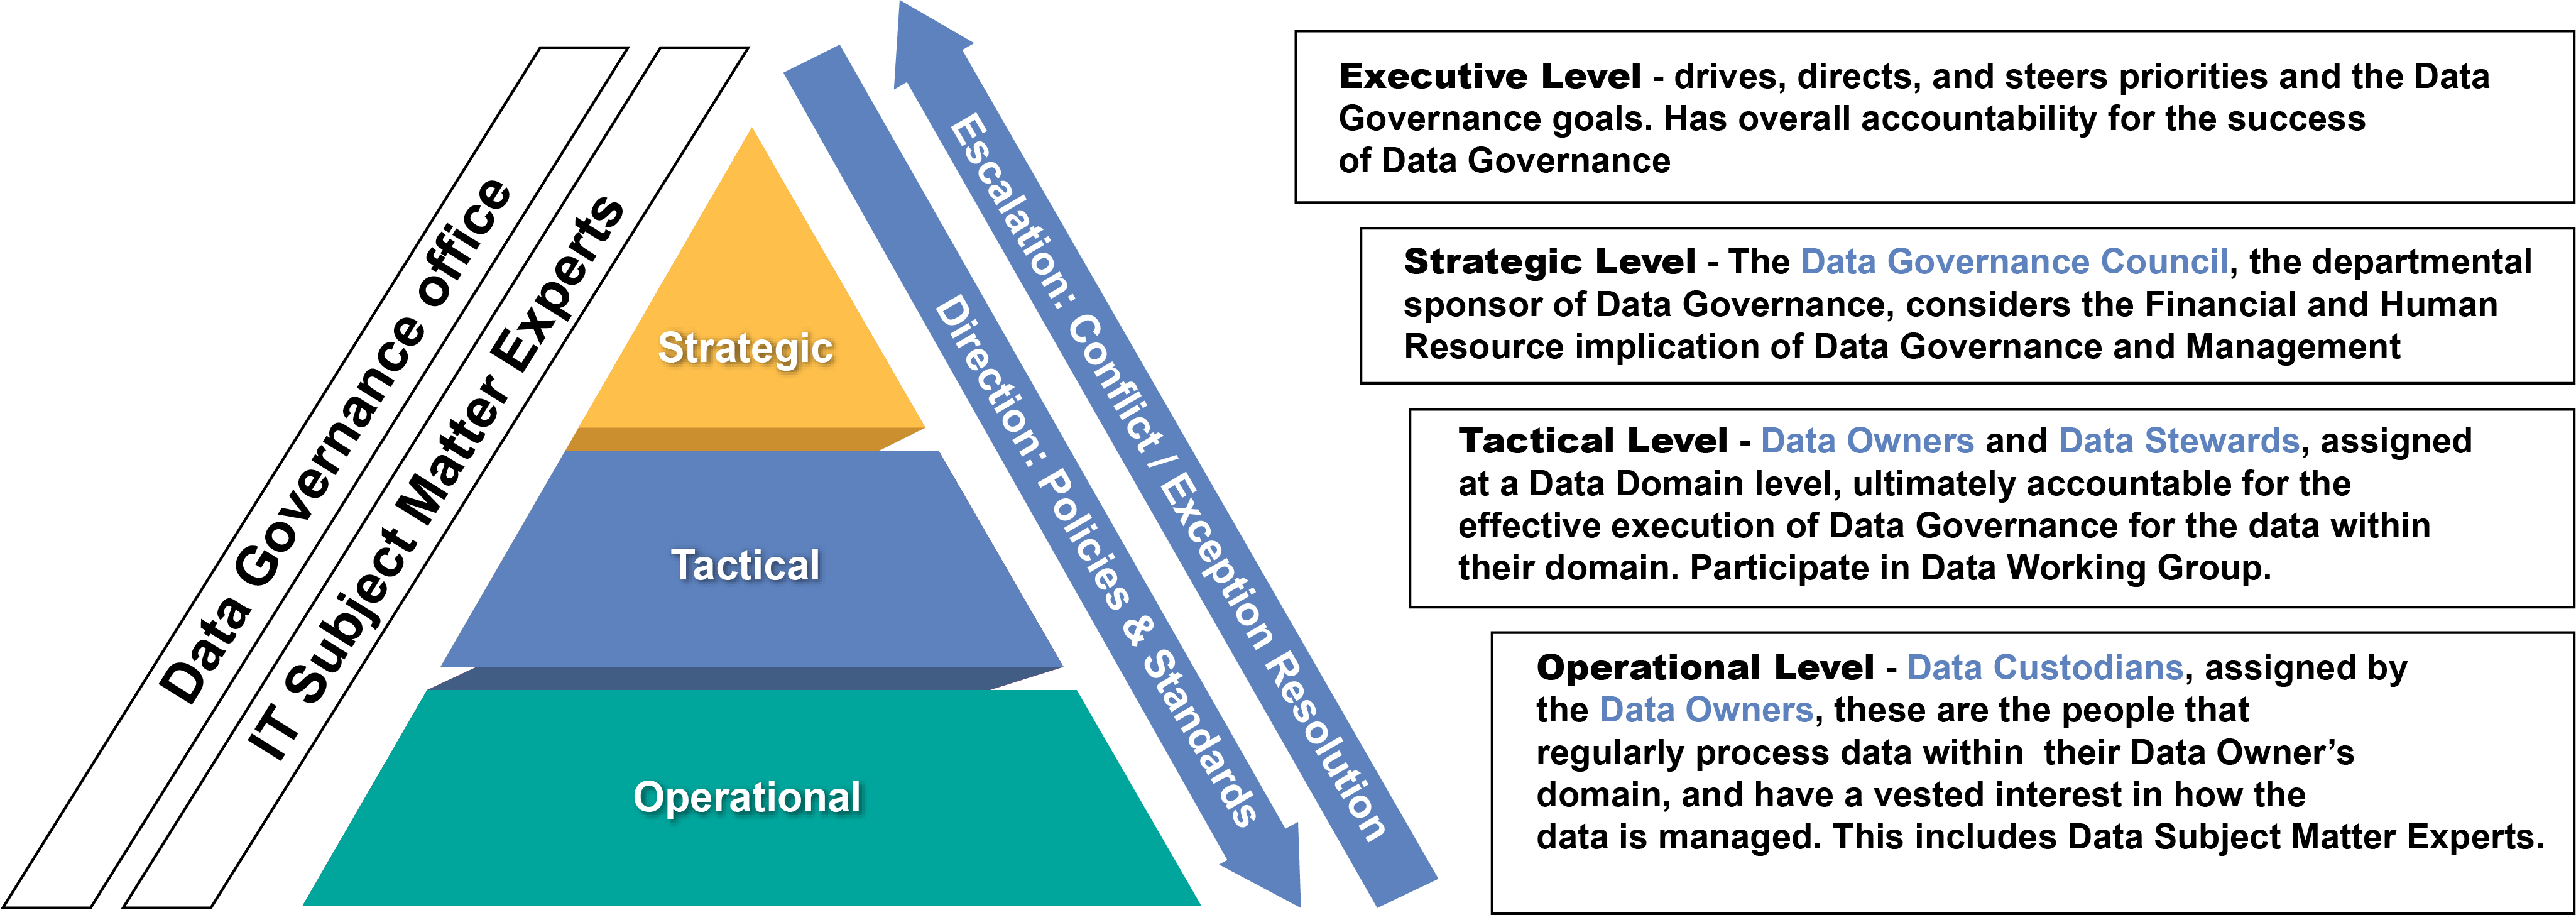 Pyramid chart showing typical Data Governance structure and roles